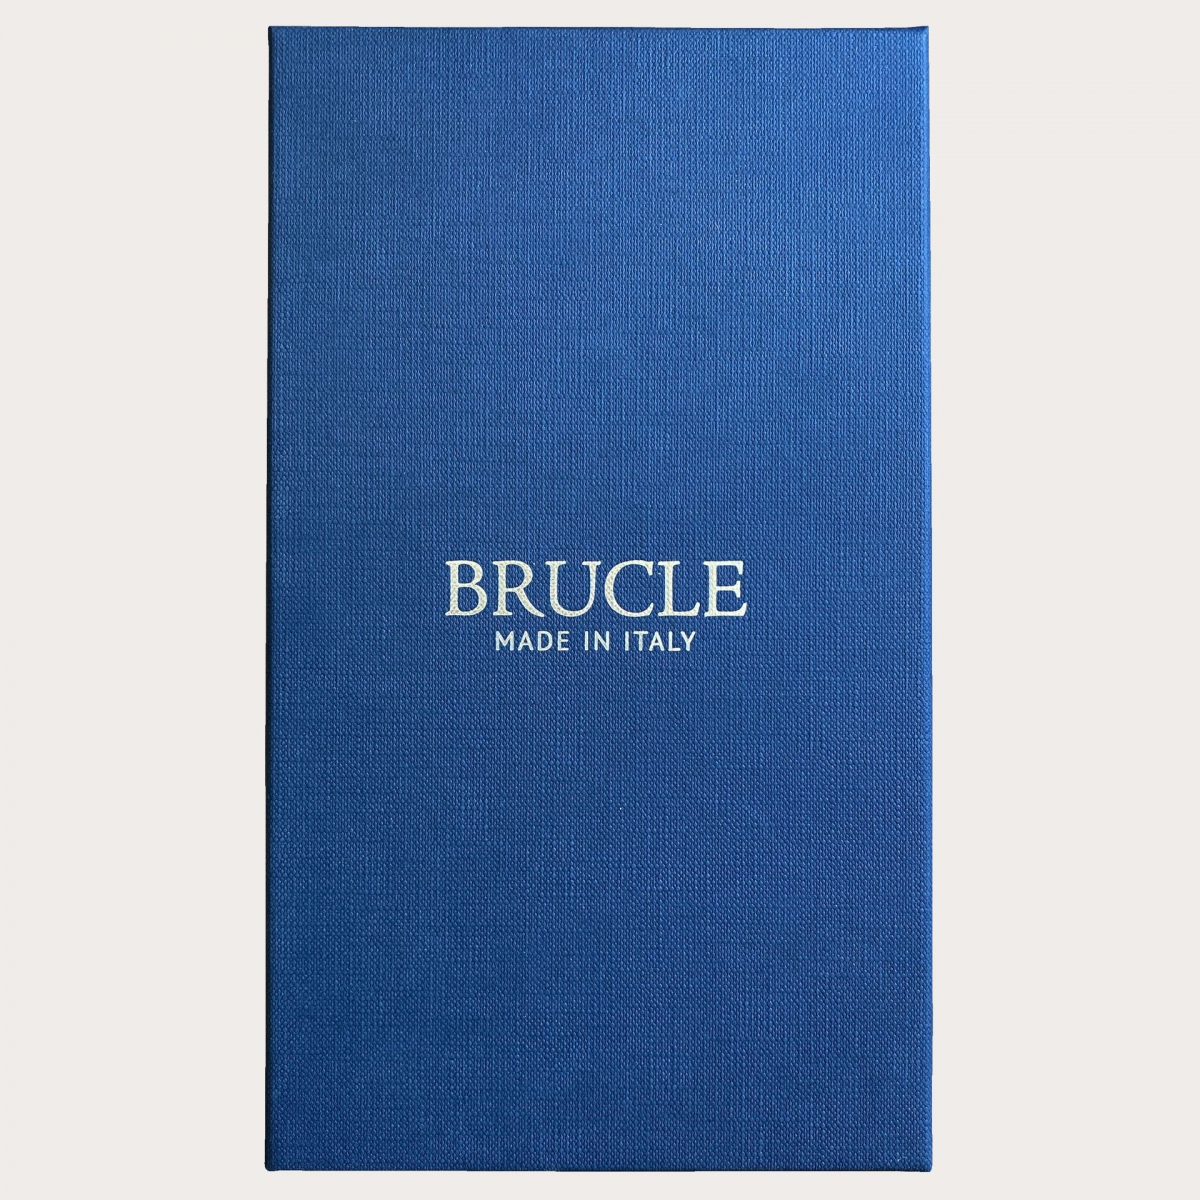 BRUCLE Silk braces with buttonholes, tone-on-tone blue paisley pattern